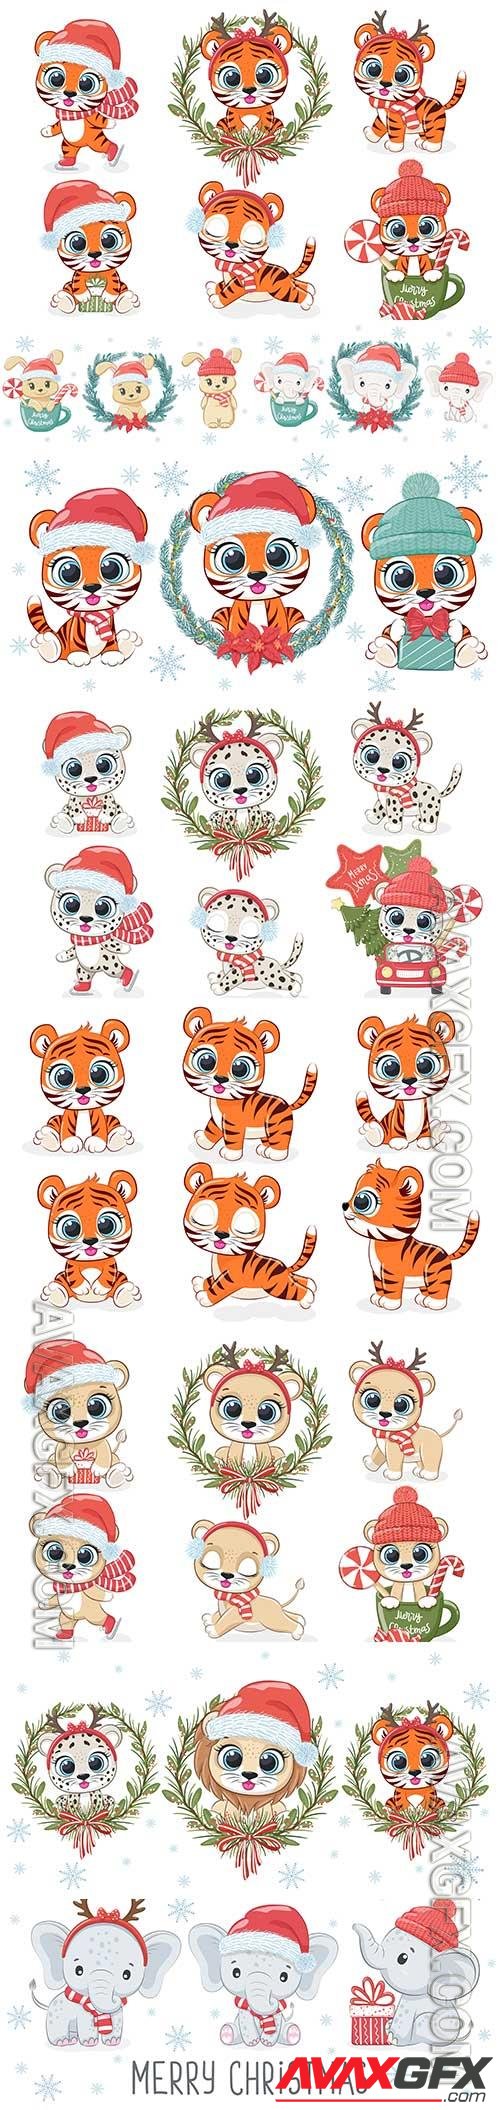 Cute animals for the new year and christmas vector illustrations